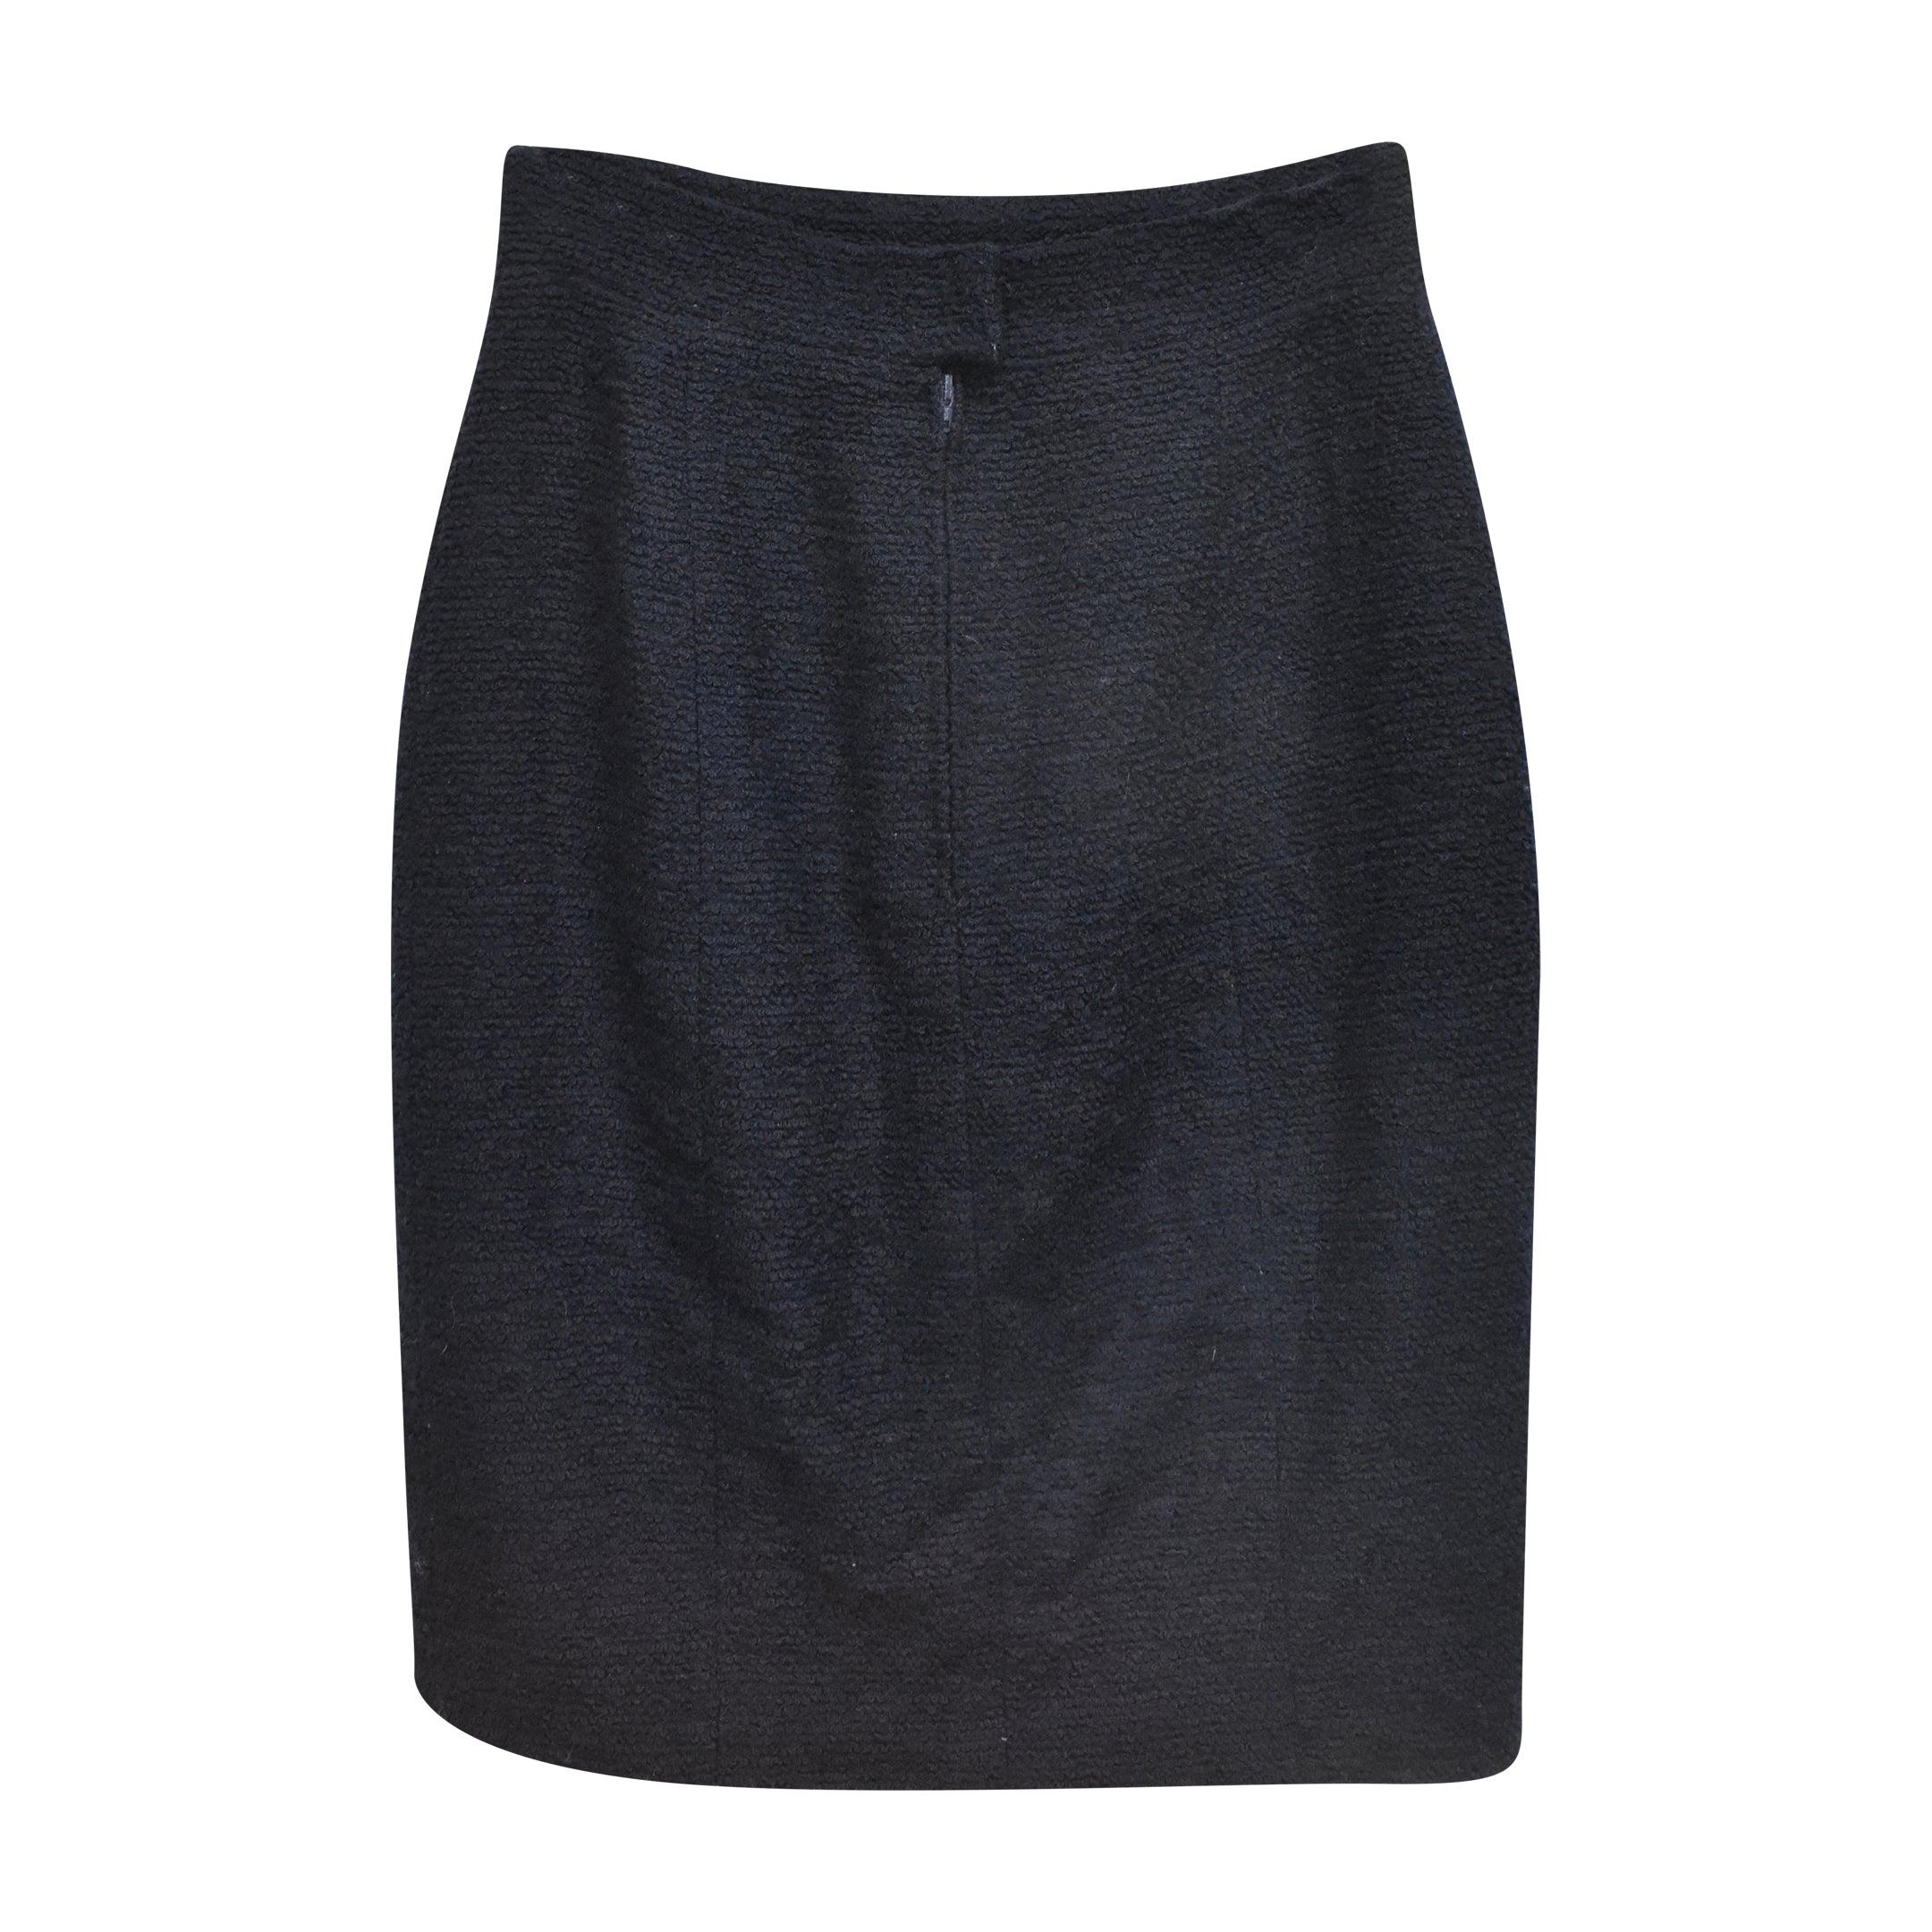 Chanel Pencil Skirt - Women's 38 - Fashionably Yours